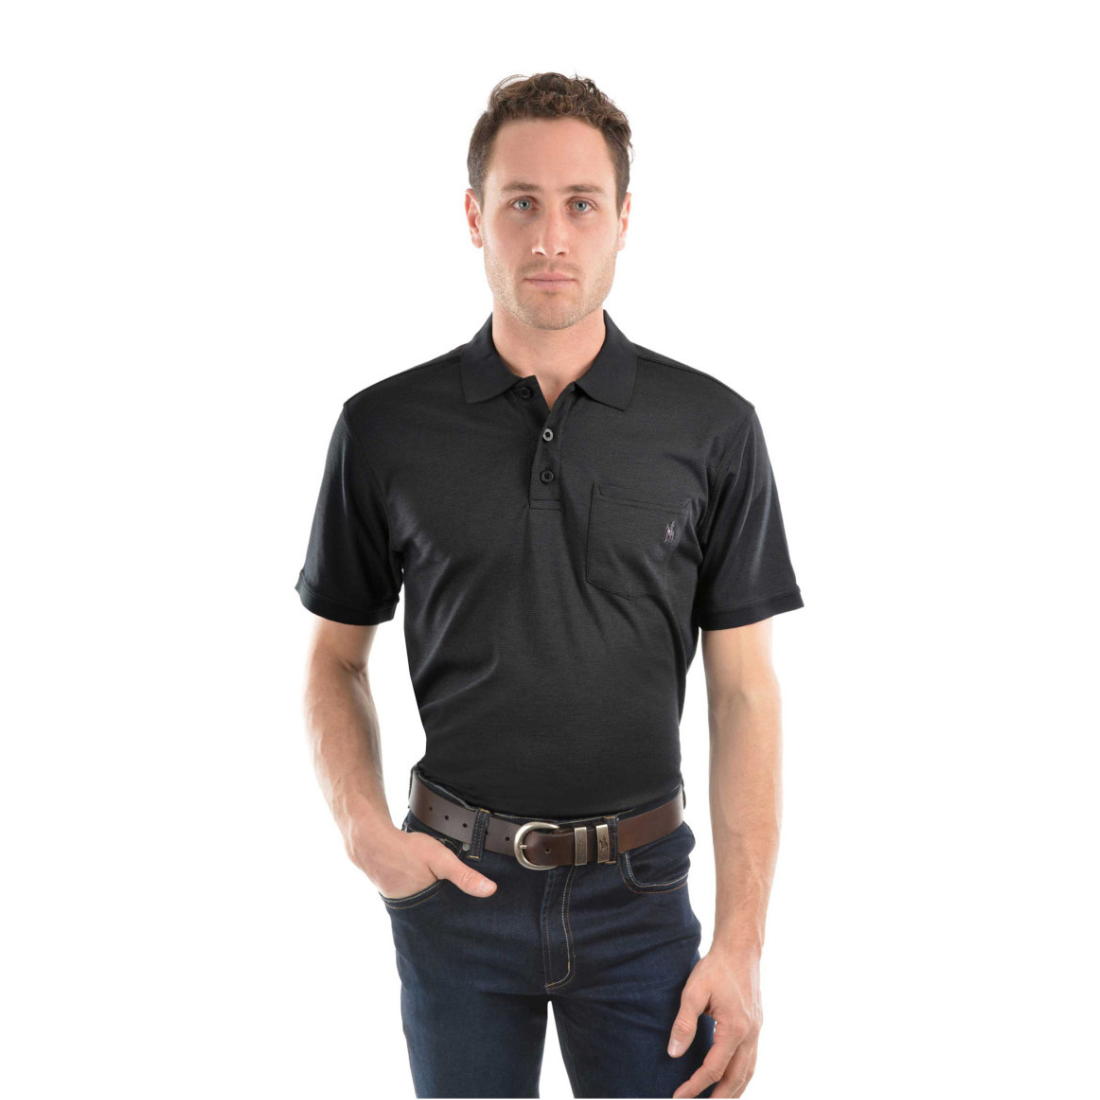 Bamboo S/Slv Polo 3XL Charcoal Mens Polo by Thomas Cook | The Bloke Shop